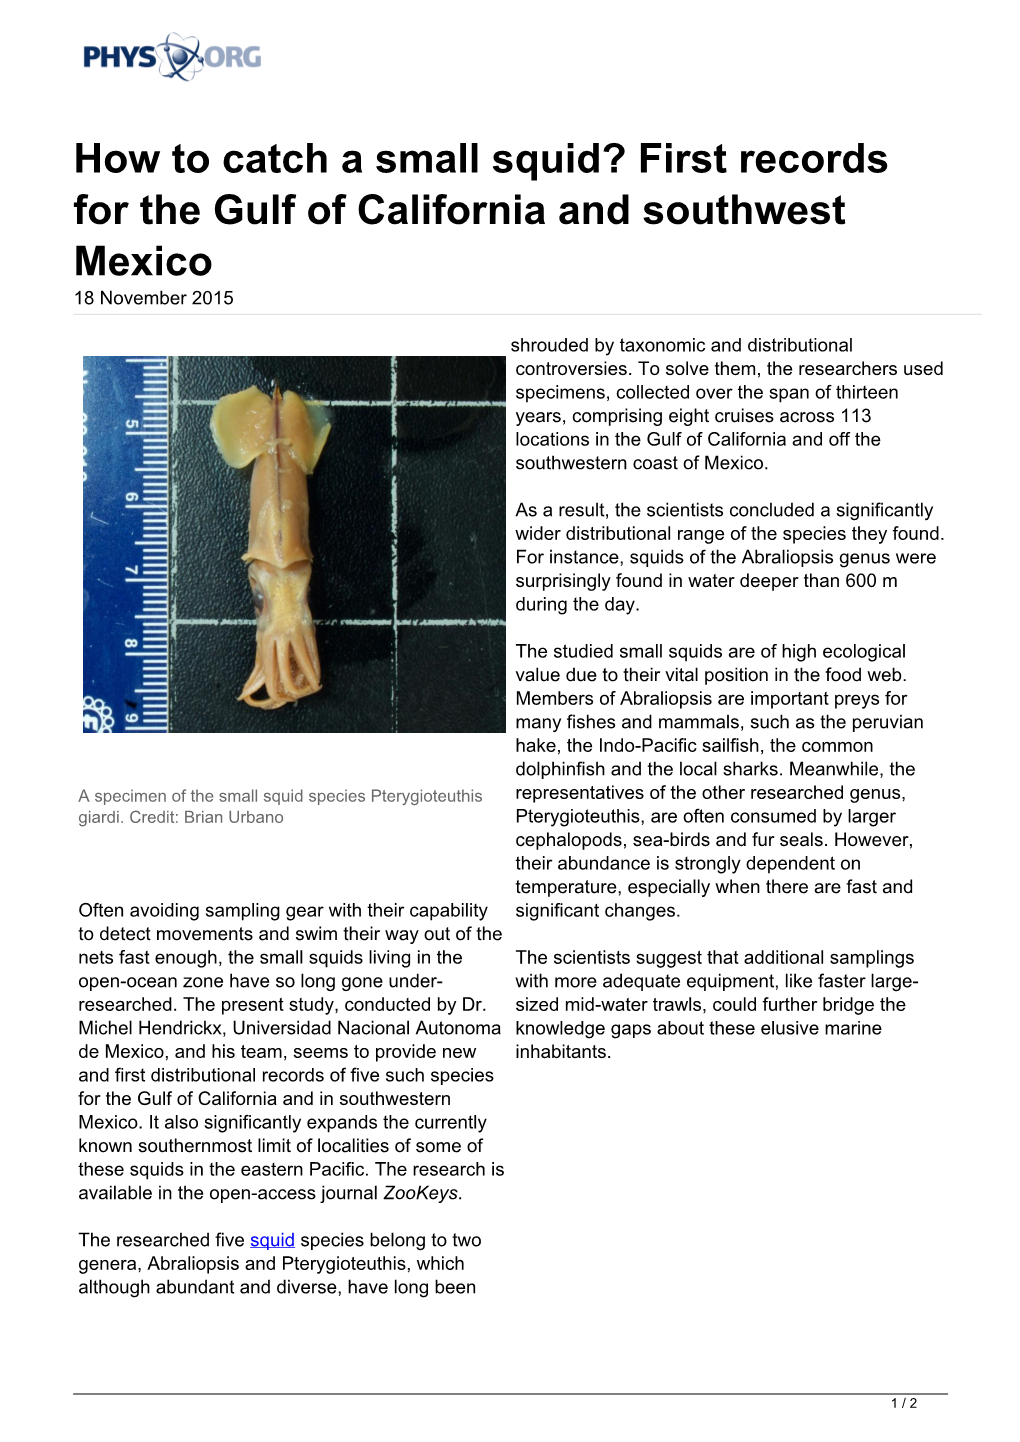 How to Catch a Small Squid? First Records for the Gulf of California and Southwest Mexico 18 November 2015